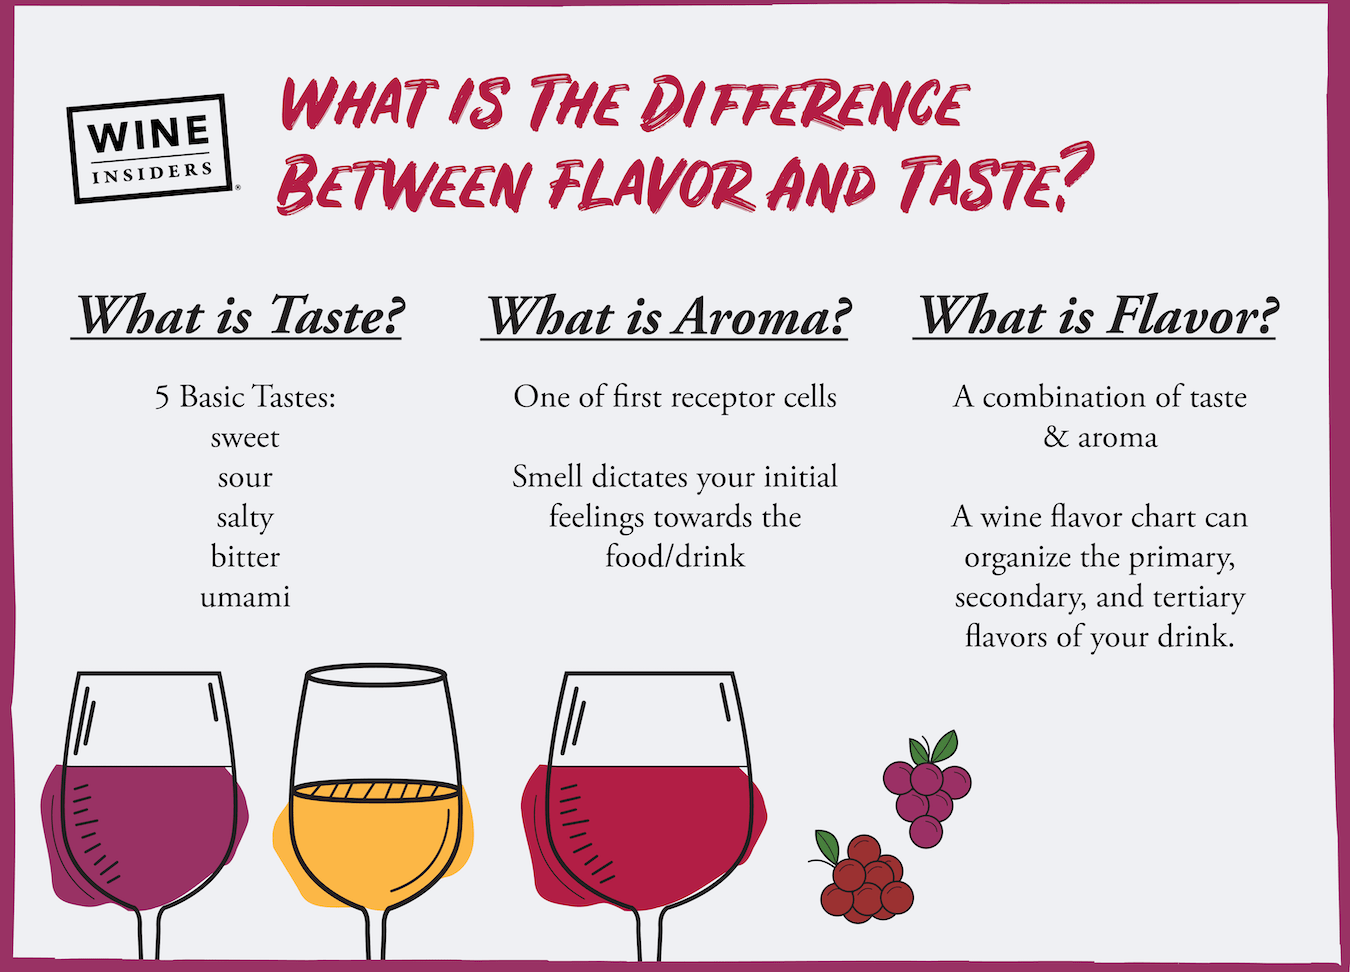 What is the Difference Between Flavor and Taste?